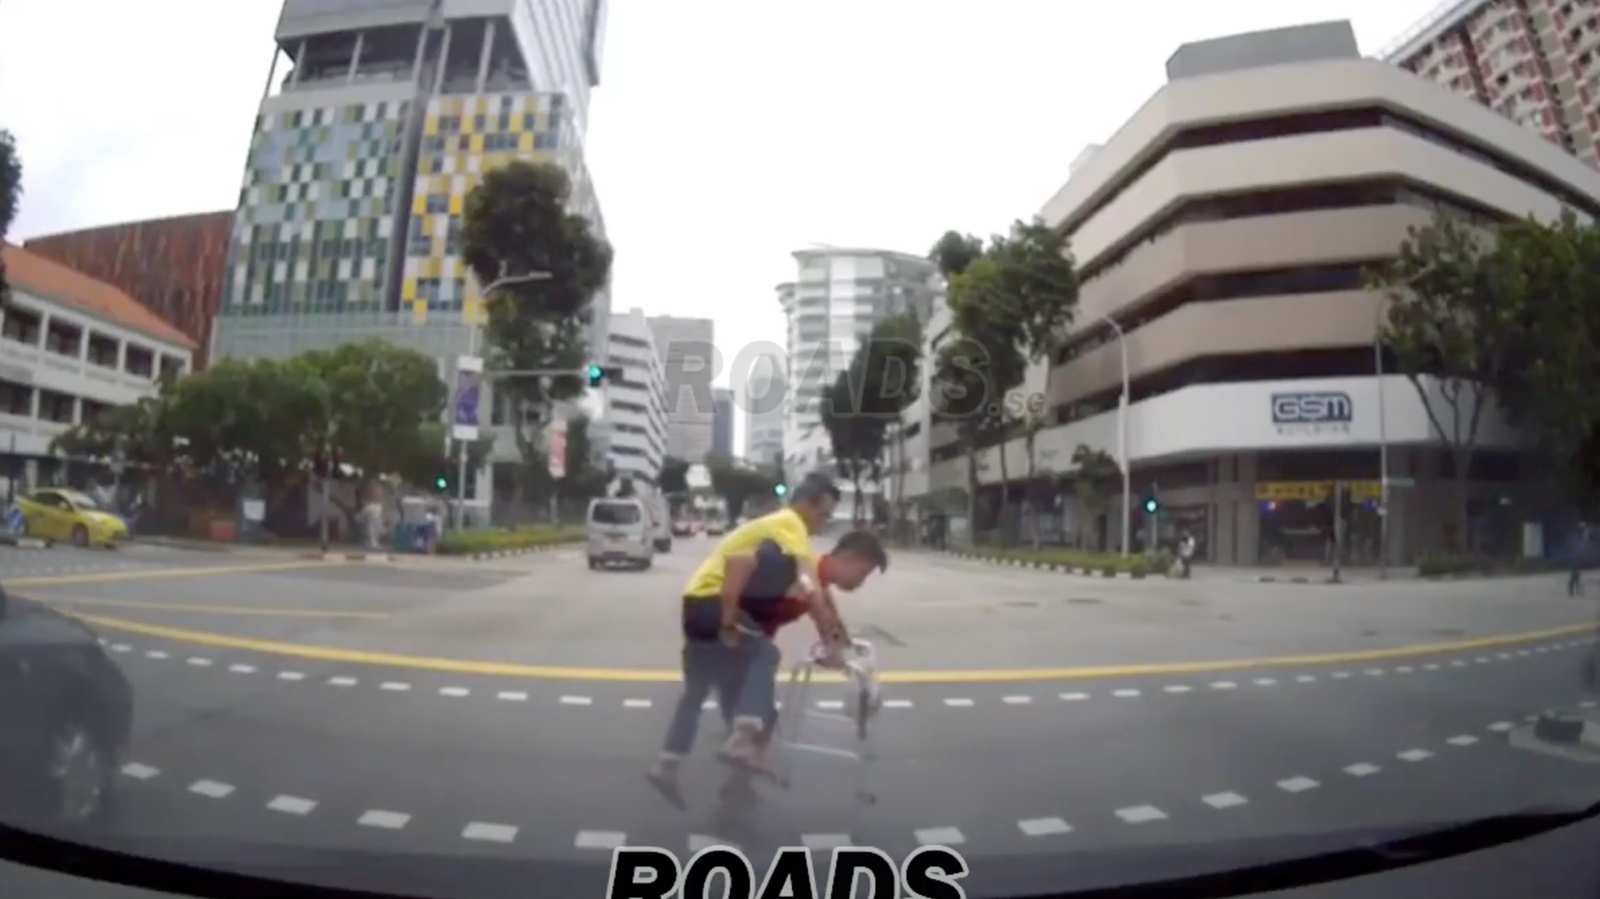 To ensure his safety, DHL driver piggybacks elderly man across the road